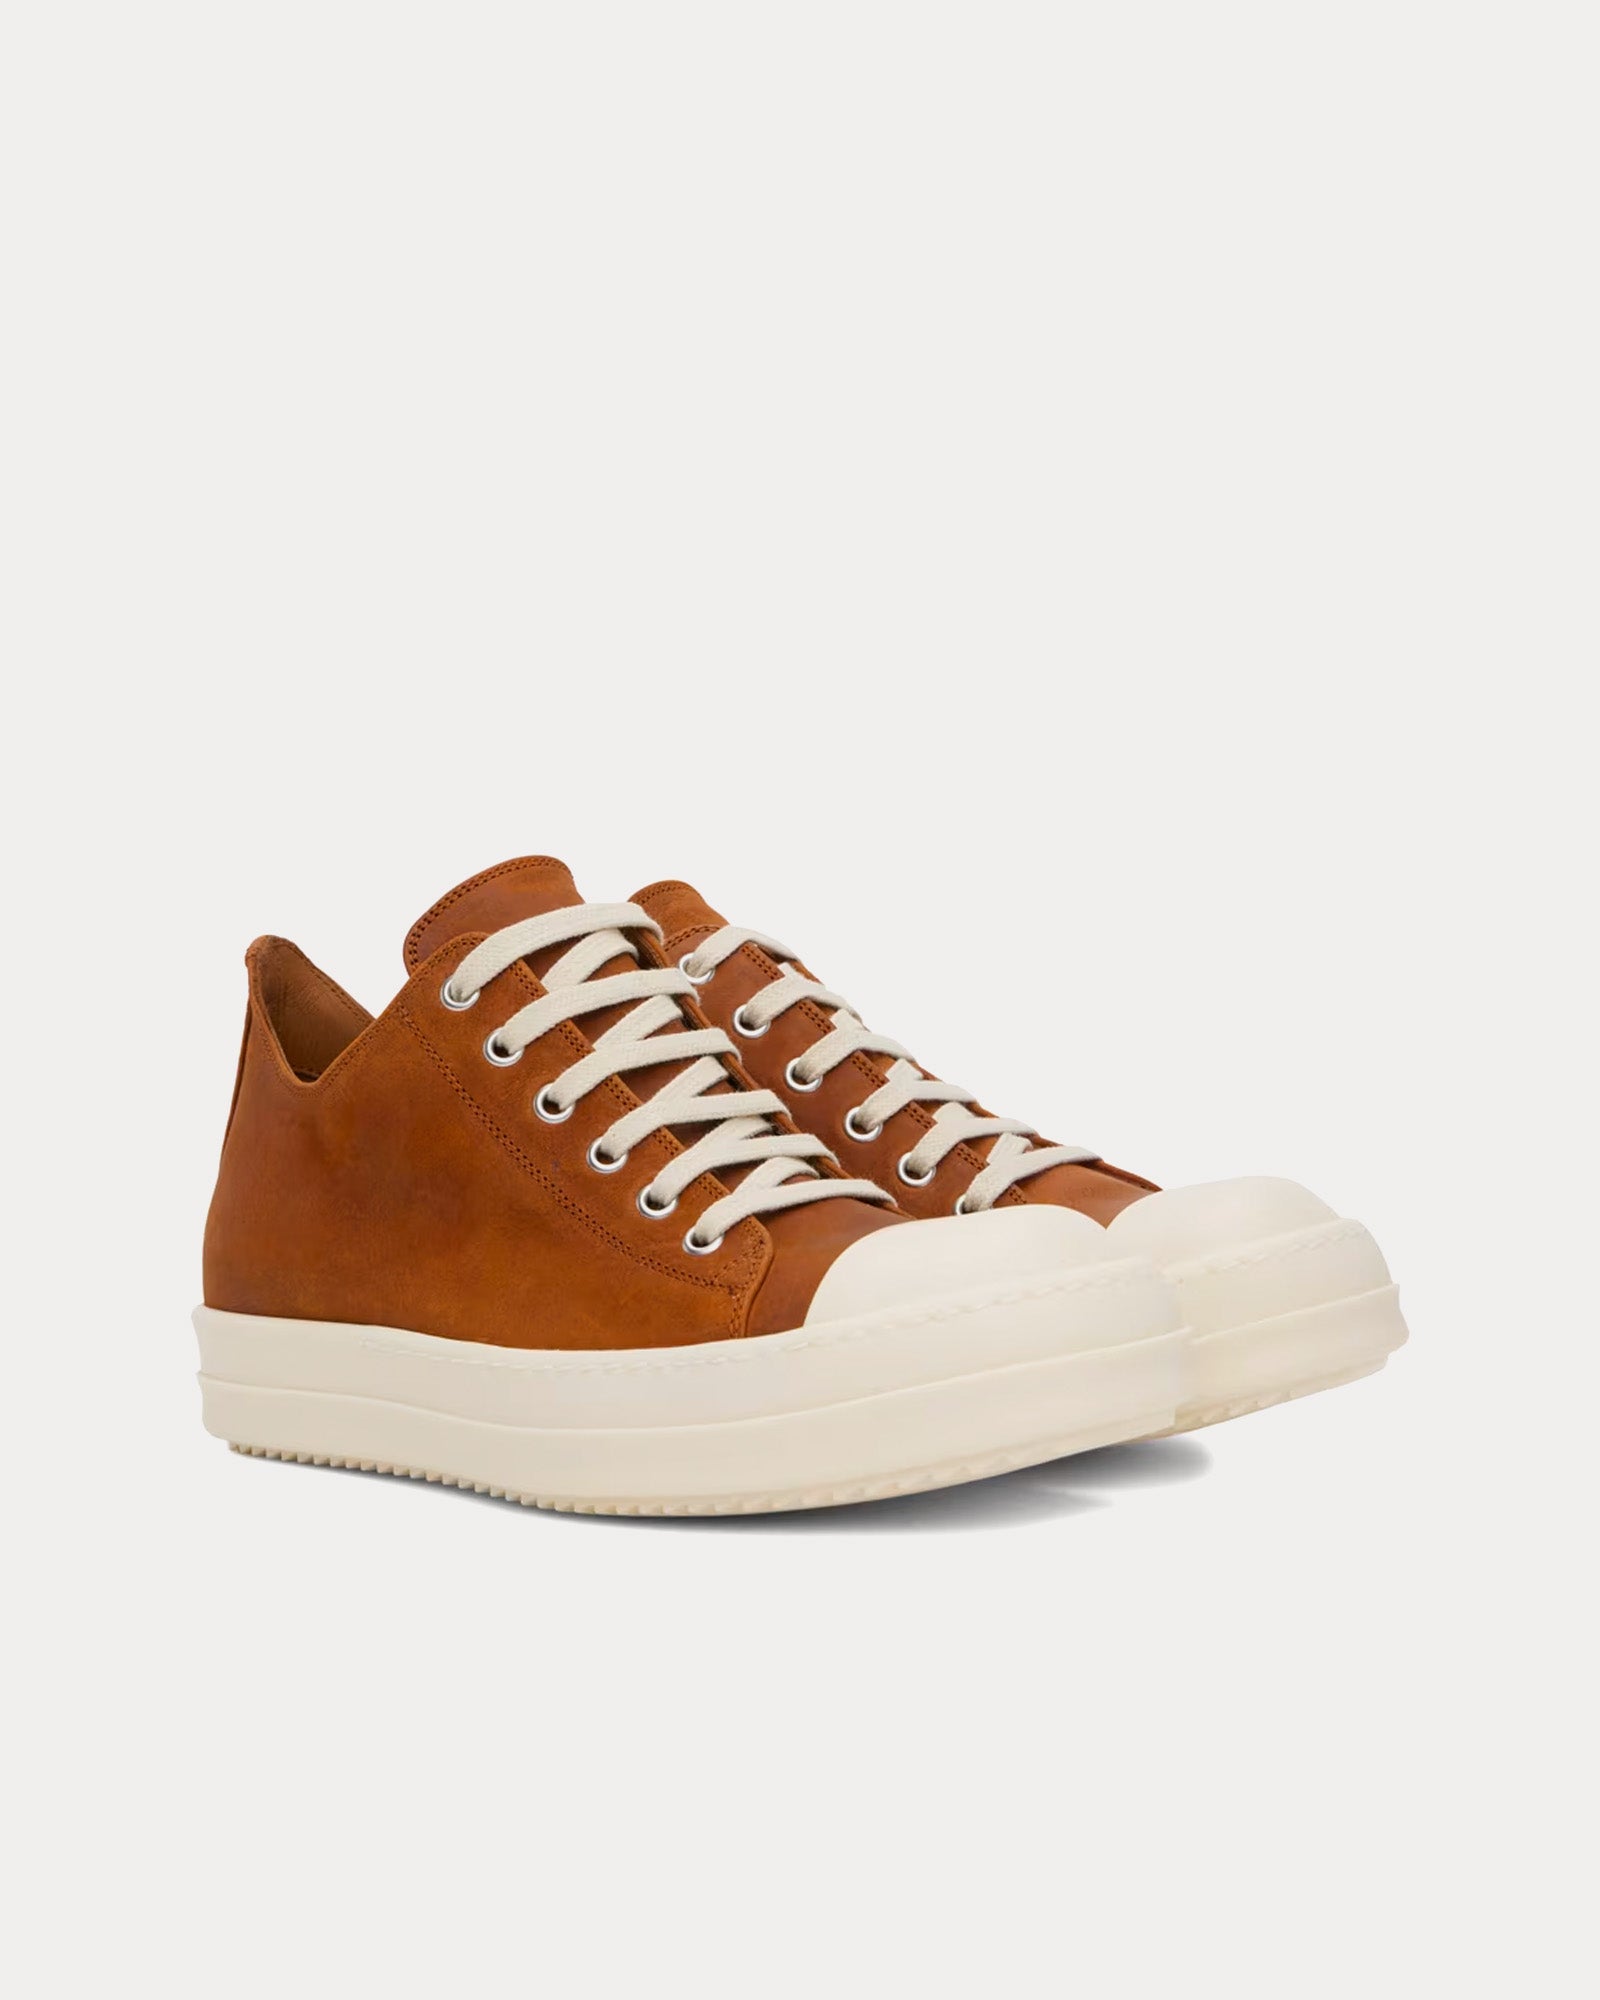 Rick Owens - Leather Clay / Milk Low Top Sneakers